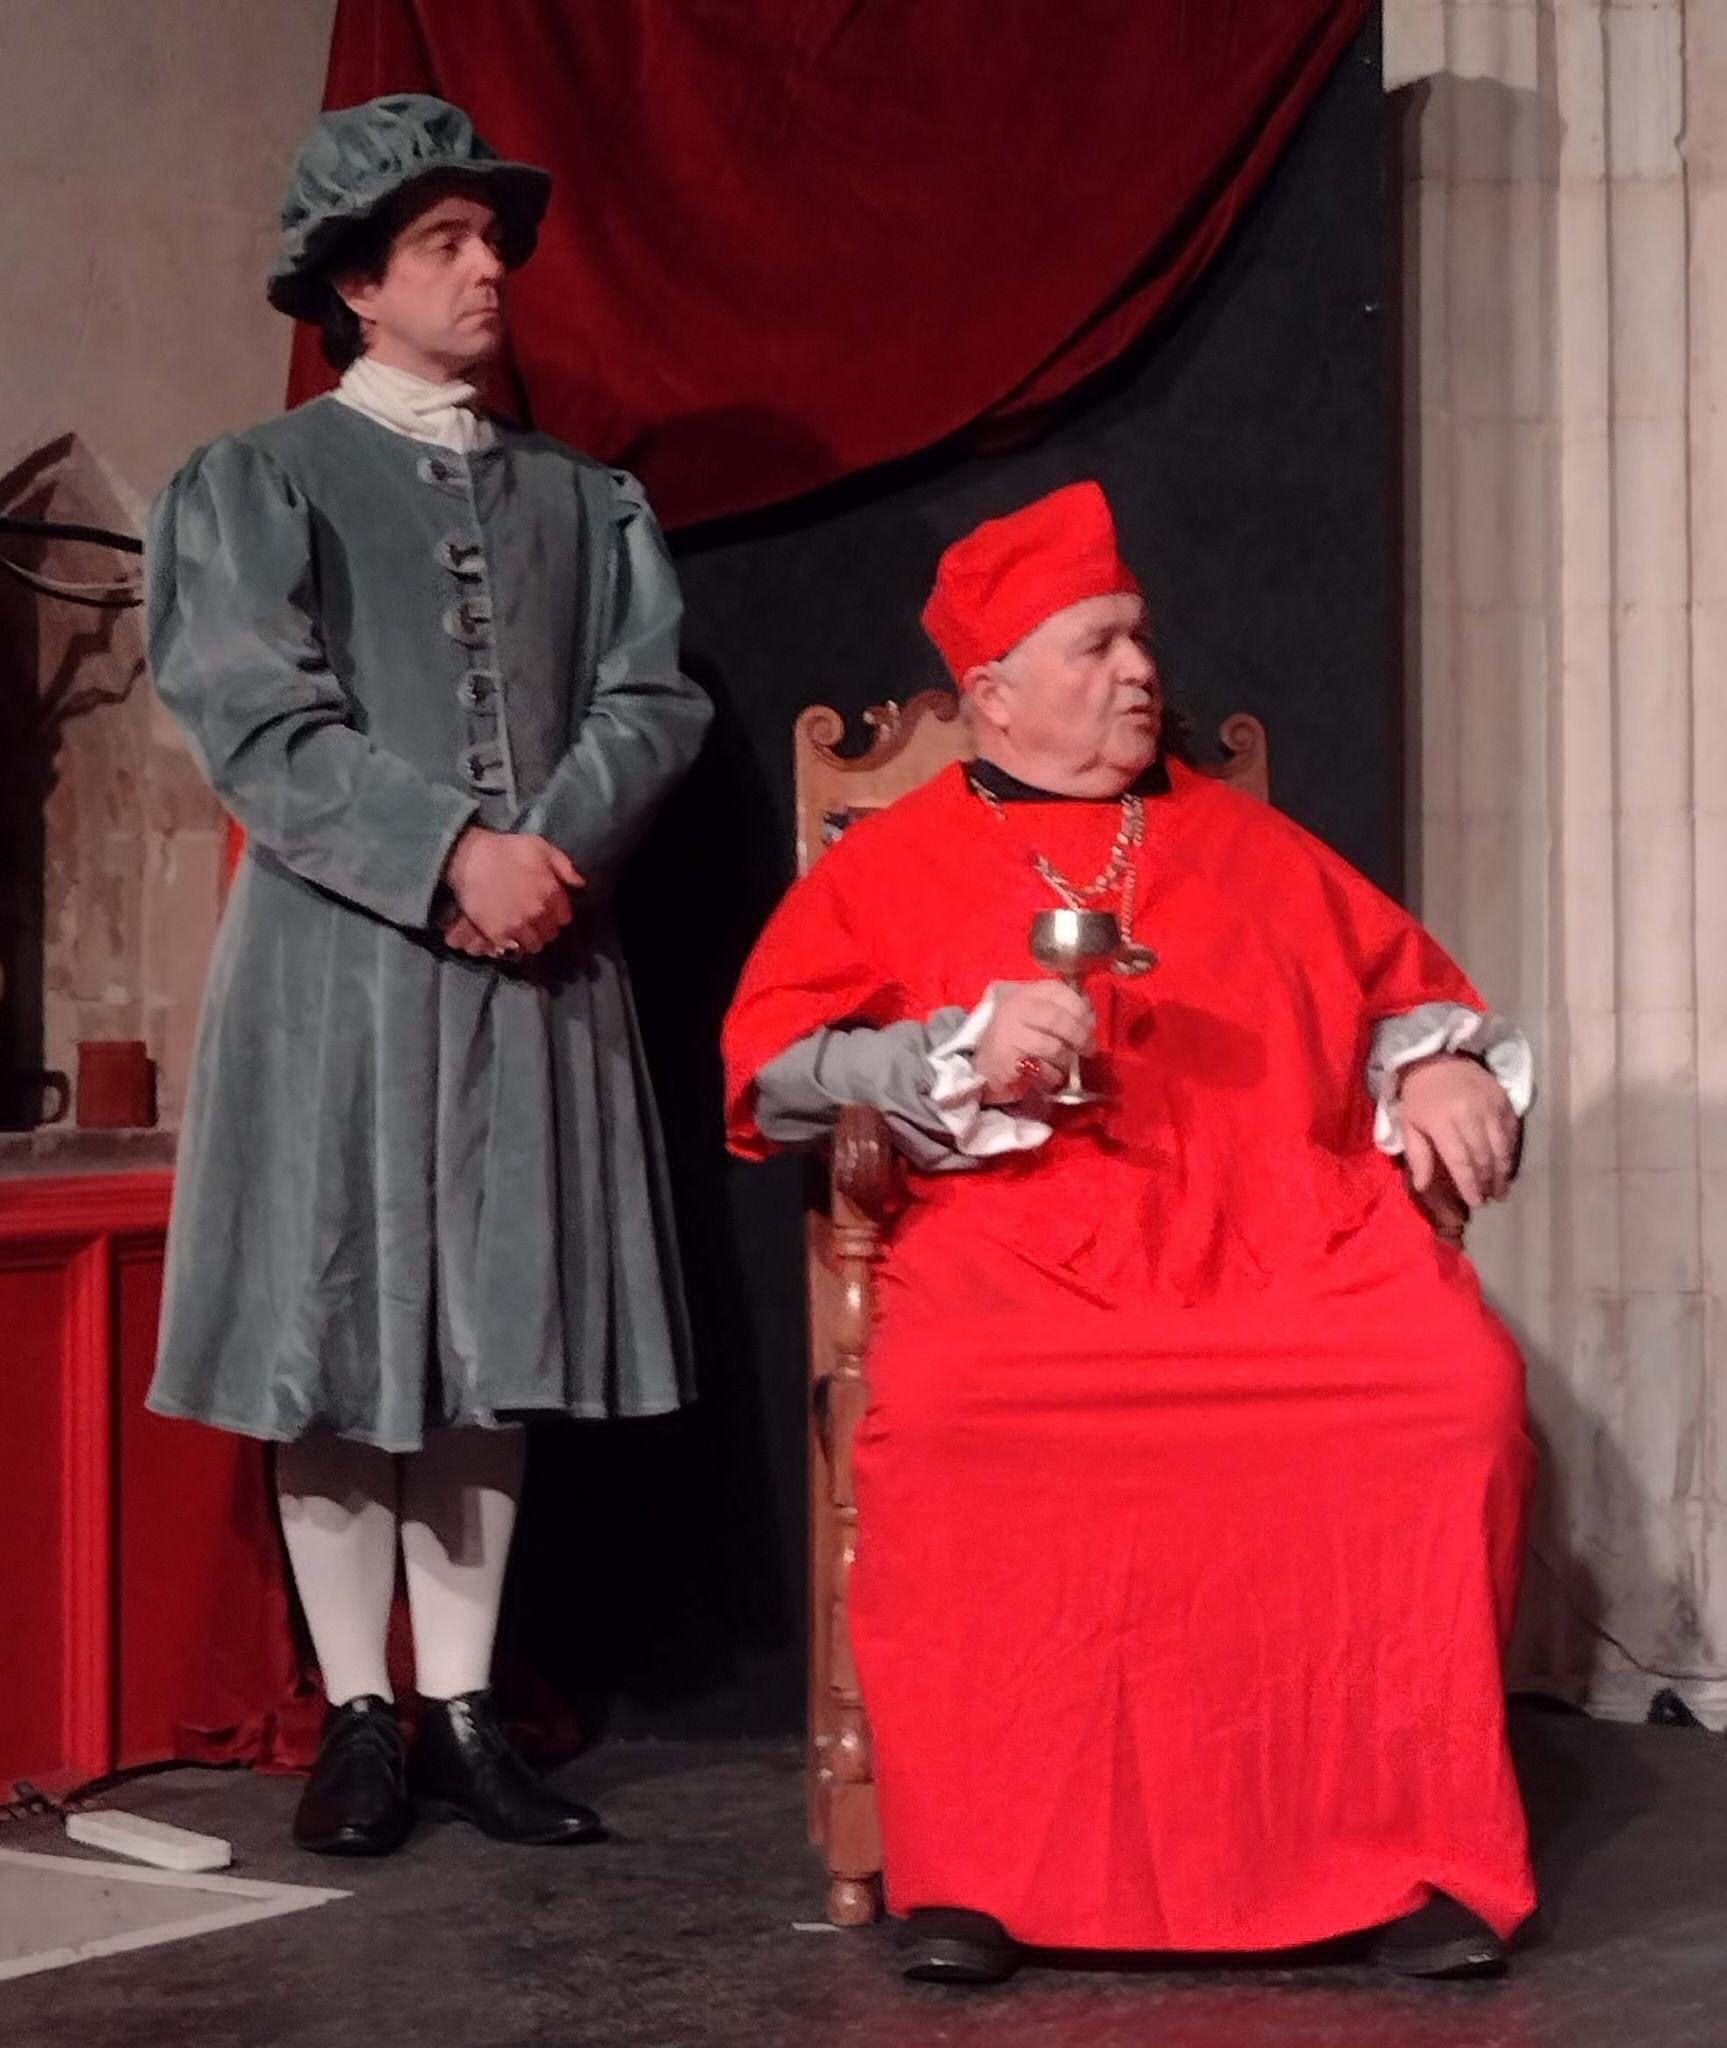 Thomas Wolsey - The Rise and Fall by Suzanne Hawkes